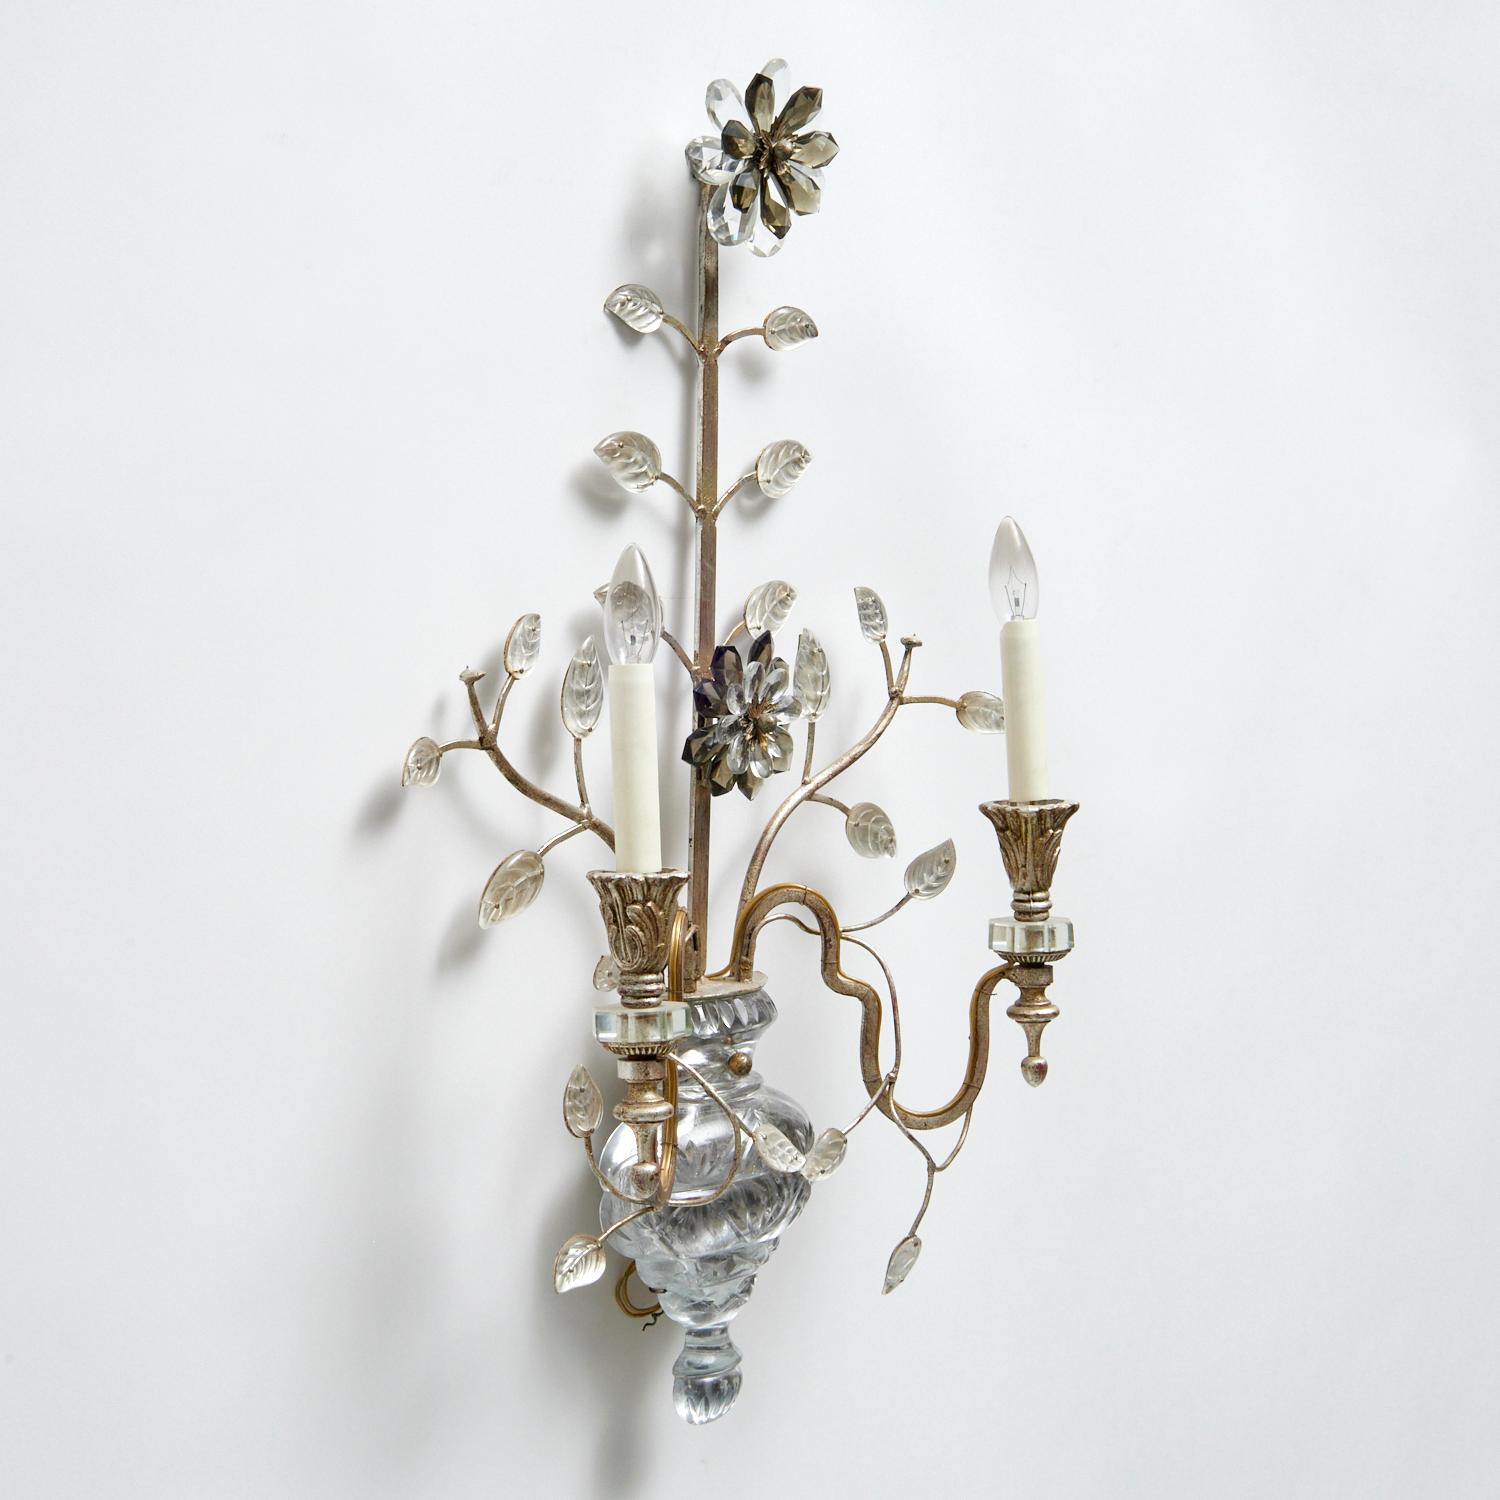 Vintage 20th c., France, attributed to Maison Baguès, a large yet delicate wall sconce. A cut crystal backplate modeled as a vase issuing a tall flower stalk with multiple leaves and cut crystal flower heads, supporting two scroll arms topped with